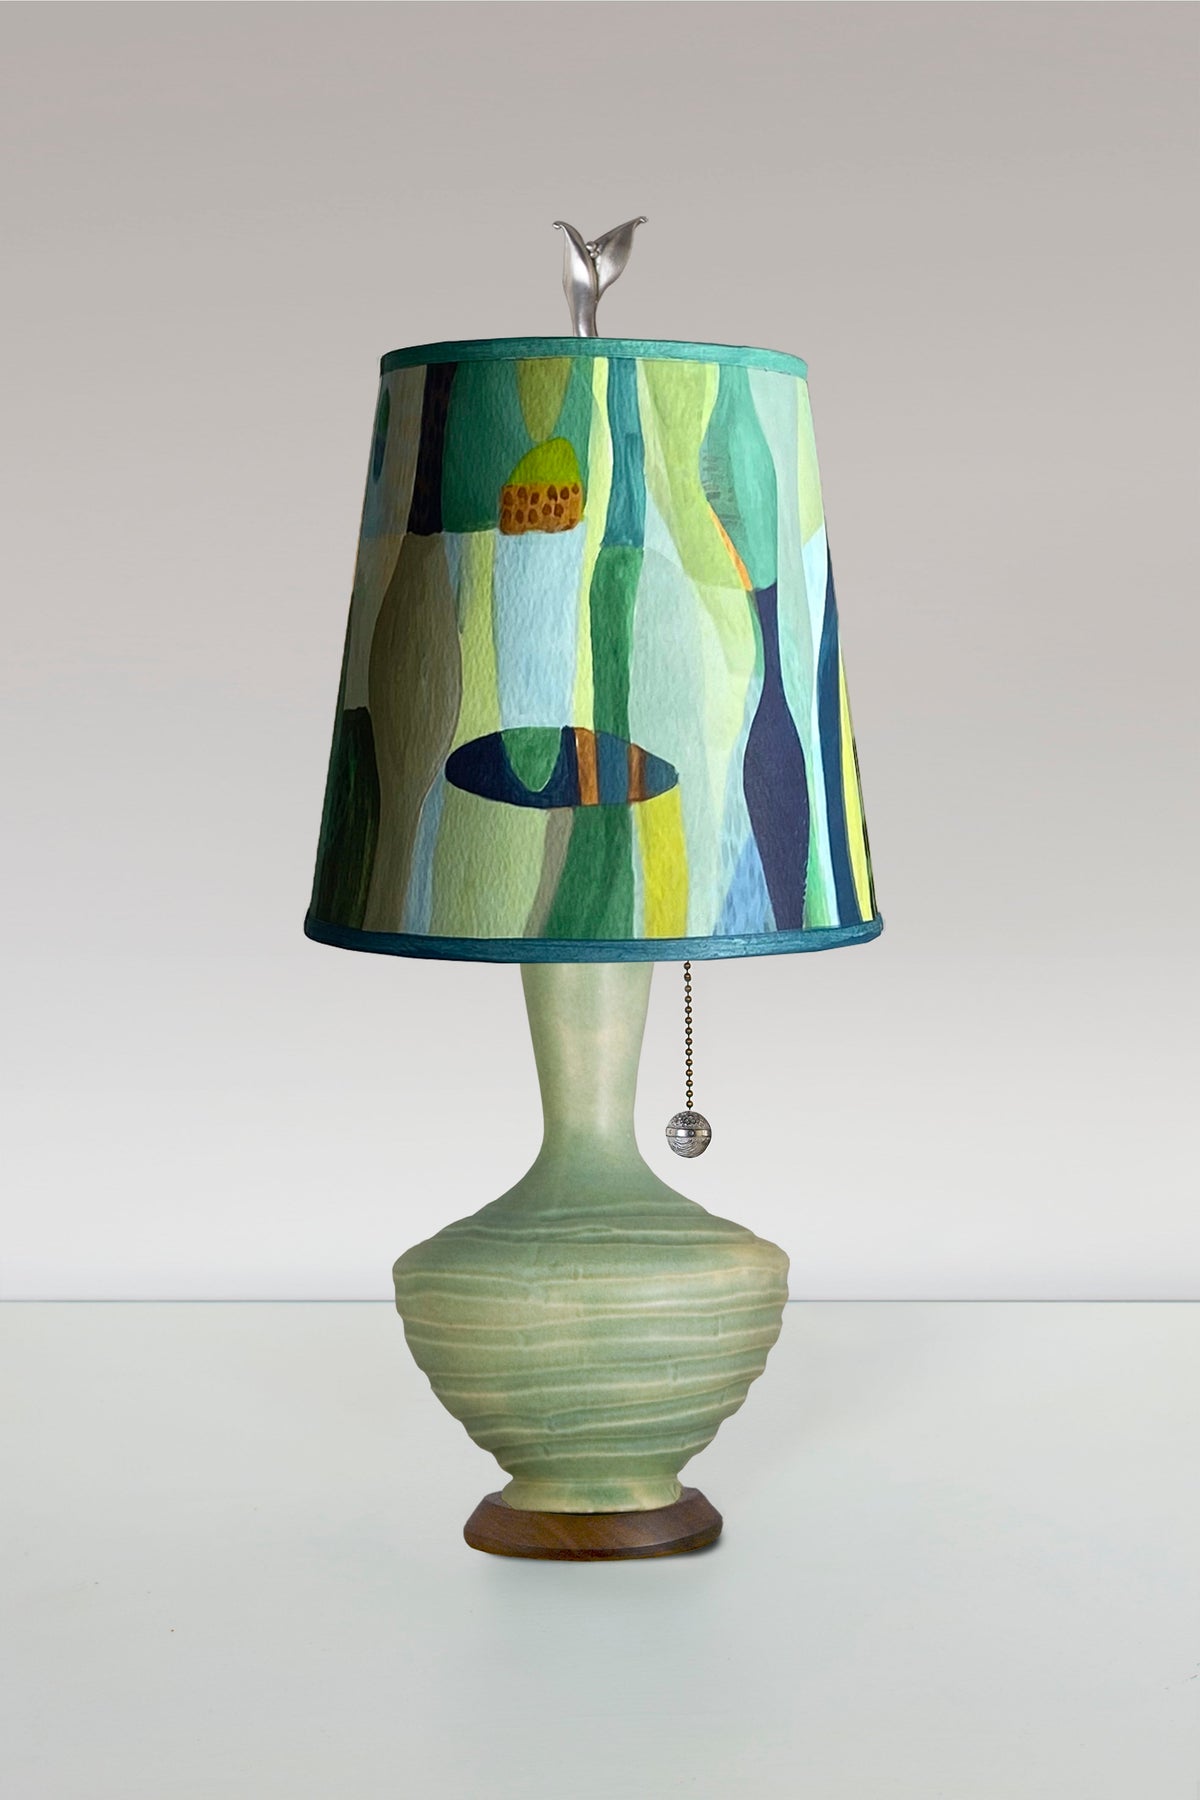 Janna Ugone &amp; Co Table Lamp Ceramic Table Lamp in Old Copper with Small Drum Shade in Riviera in Citrus